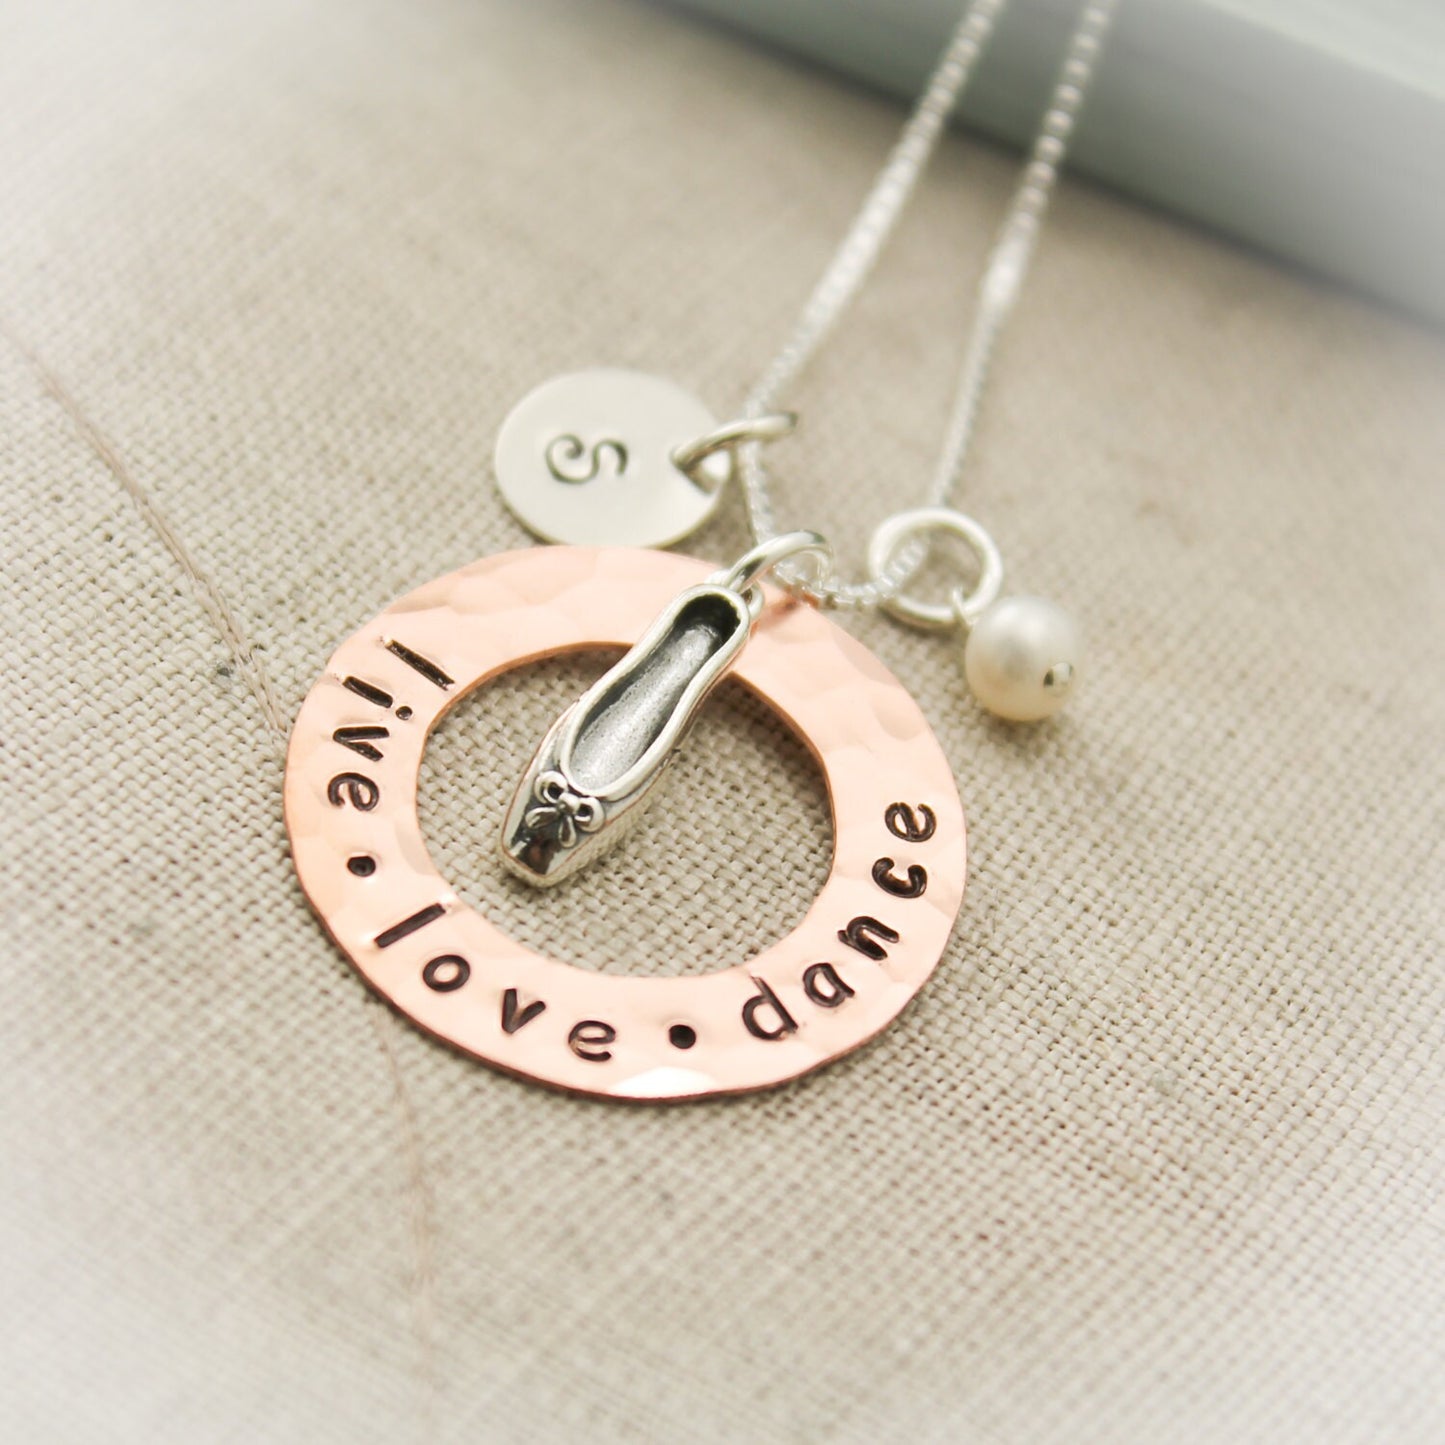 Dance Ballet Dancer Charm Necklace Copper Washer and Sterling Silver Personalized Hand Stamped Necklace